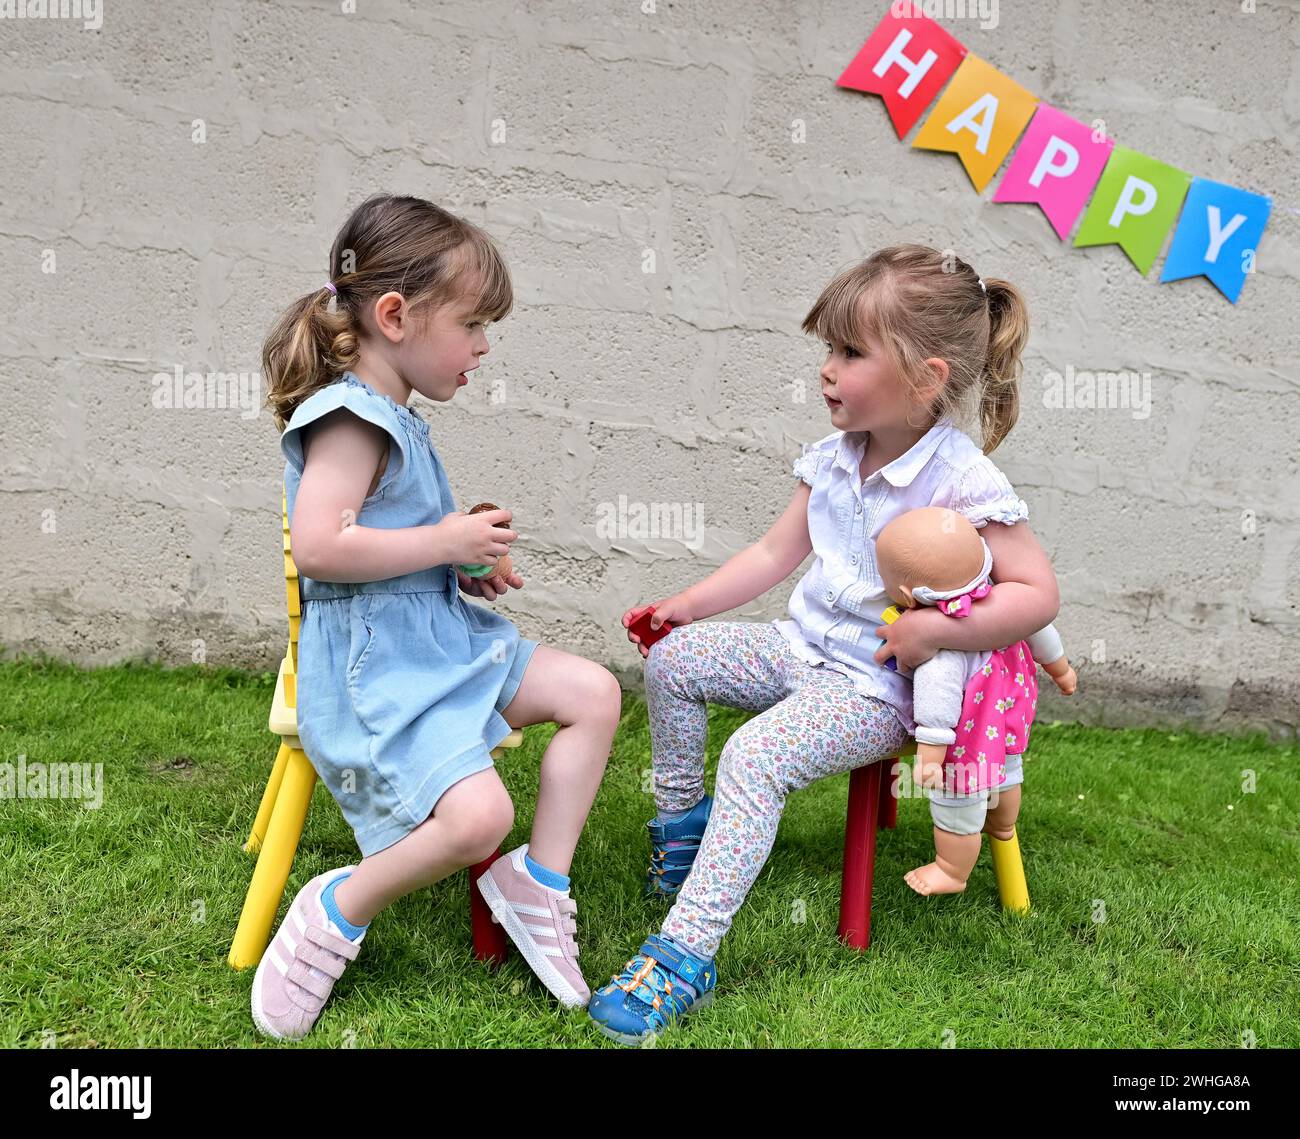 Two 3 year old children talking (girls) while sitting on chairs on grass in a garden face to face with the word HAPPY on a white wall behind. Stock Photo